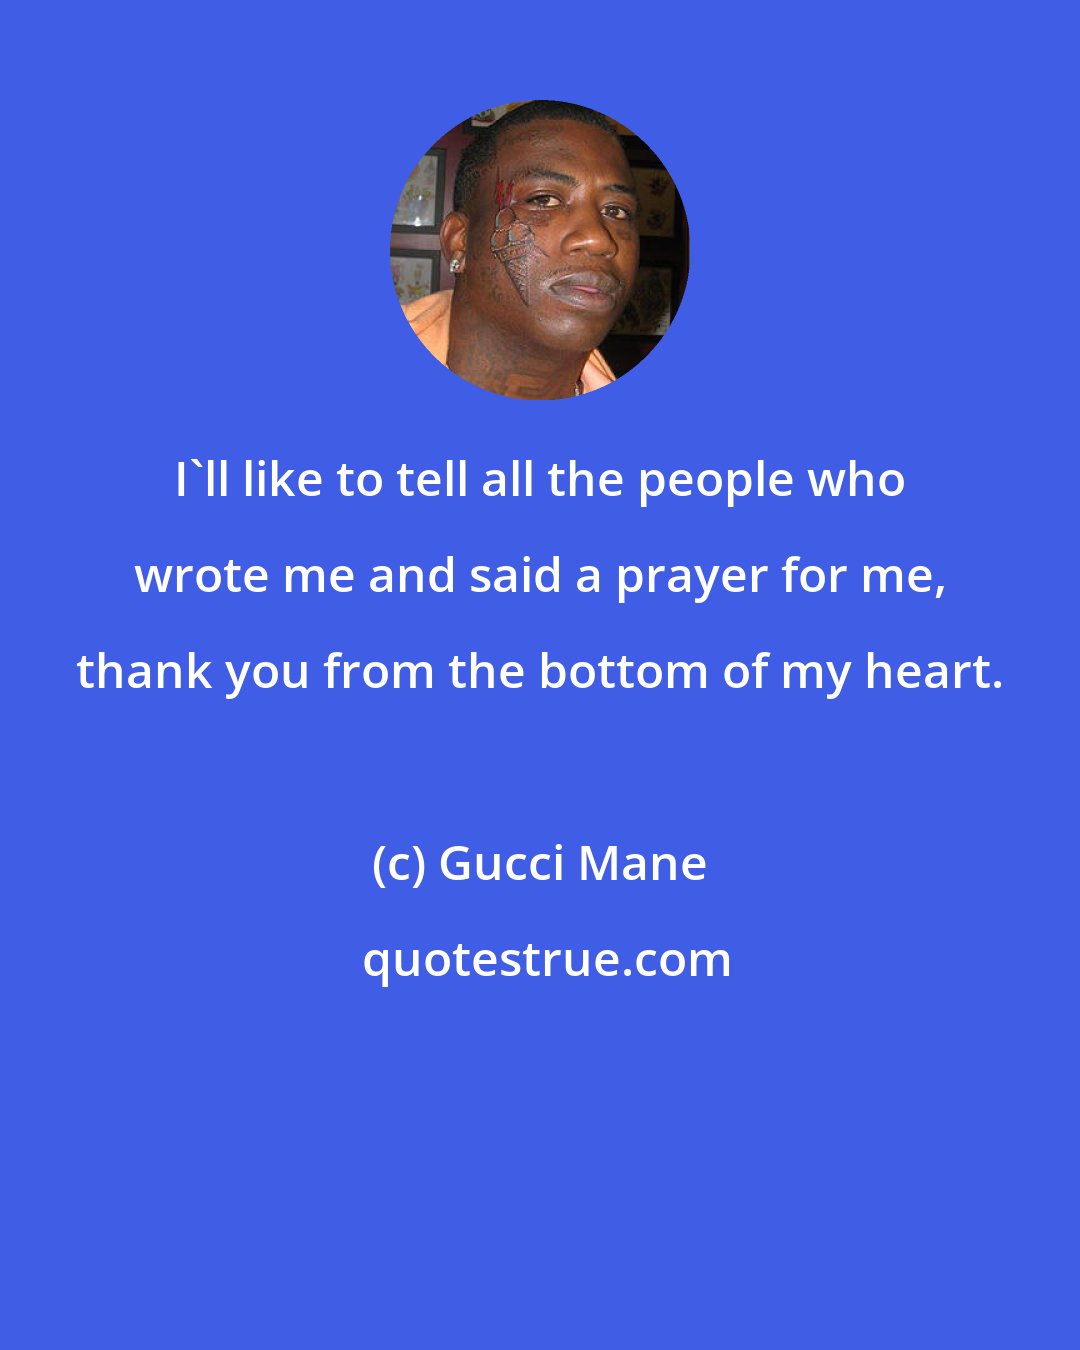 Gucci Mane: I'll like to tell all the people who wrote me and said a prayer for me, thank you from the bottom of my heart.